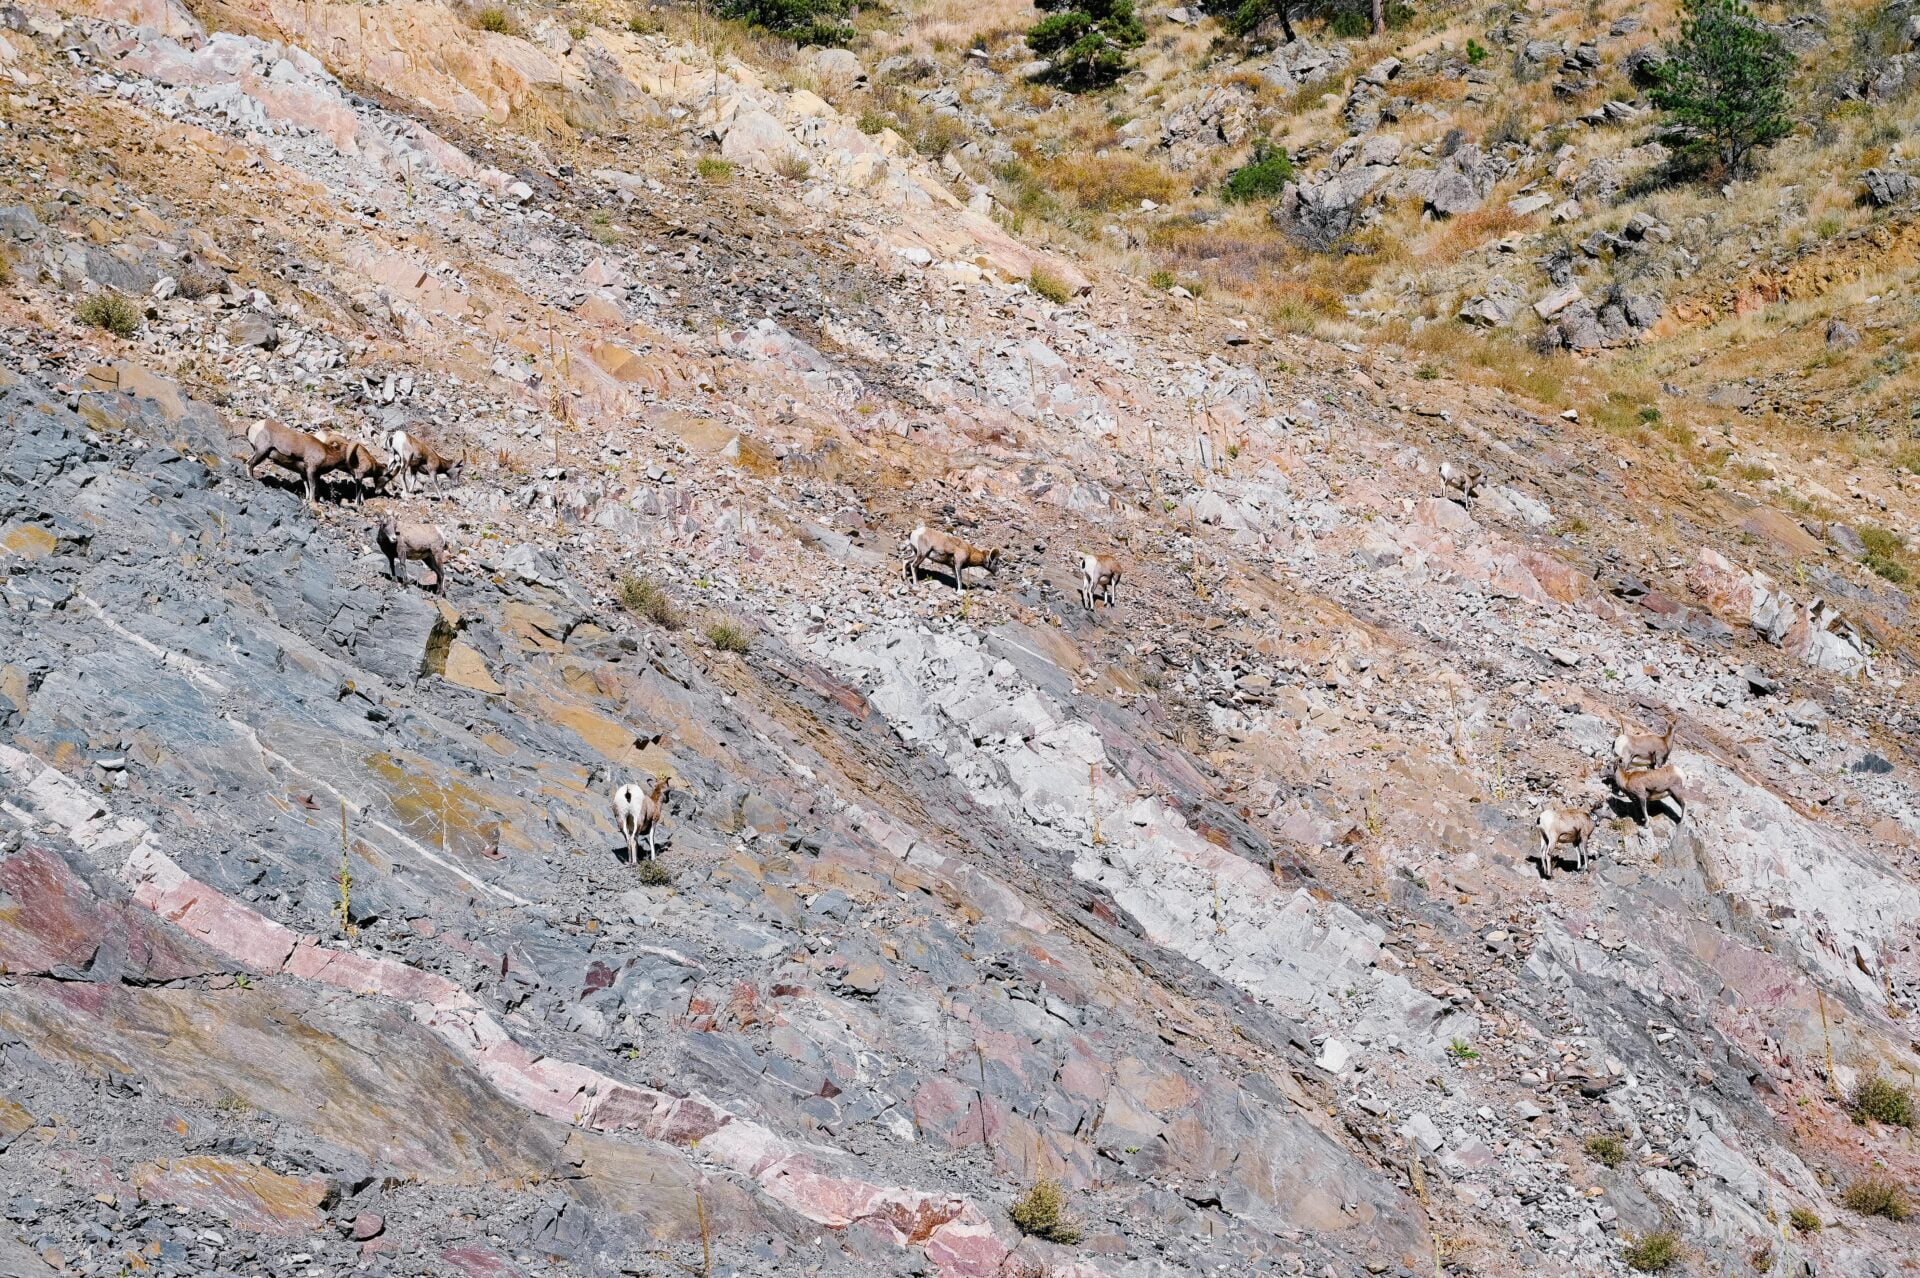 rocky mountain sheep on the cliffs beside the highway